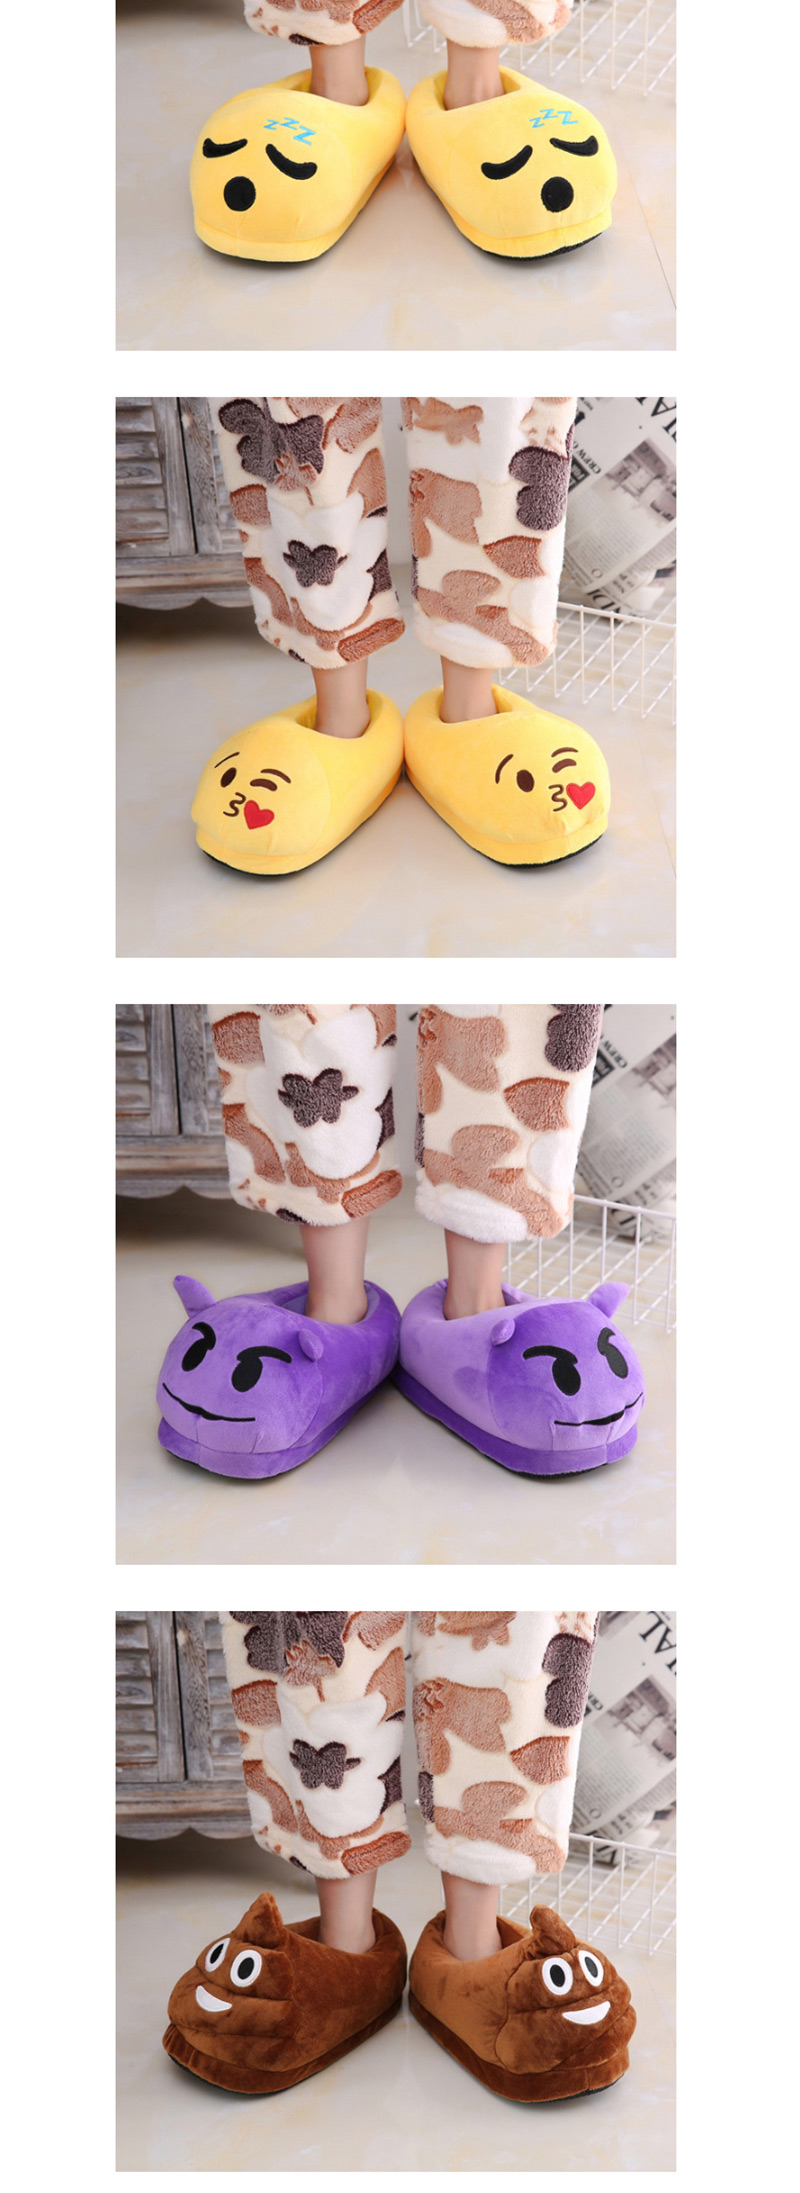 Fashion 9 Yellow Fangs Cartoon Expression Plush Bag With Cotton Slippers,Slippers